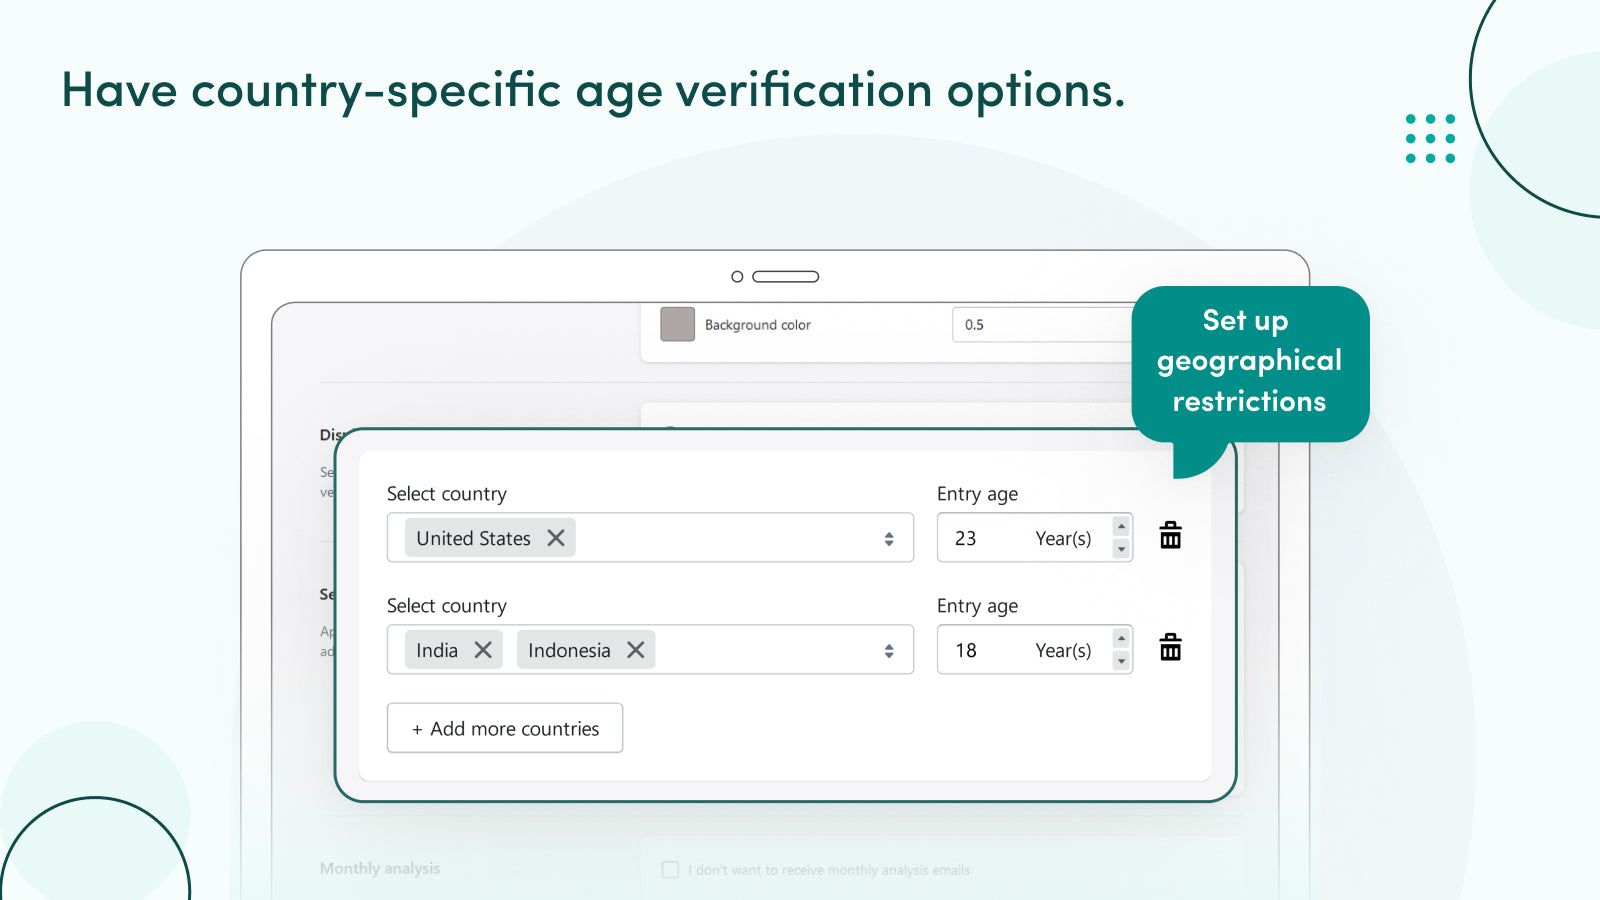 Have country-specific age verification options.